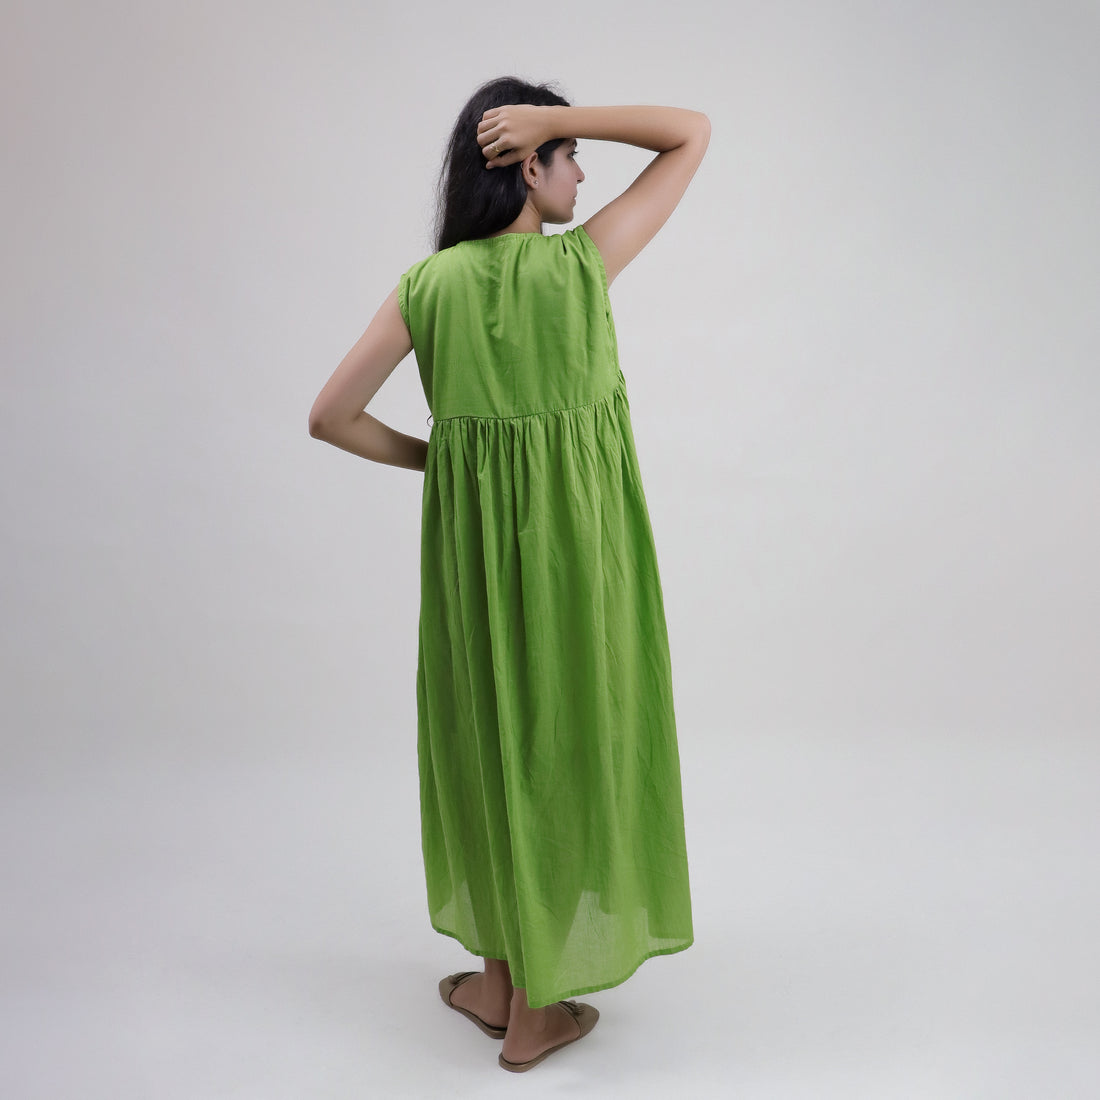 Green Solid Cotton Dress For Women